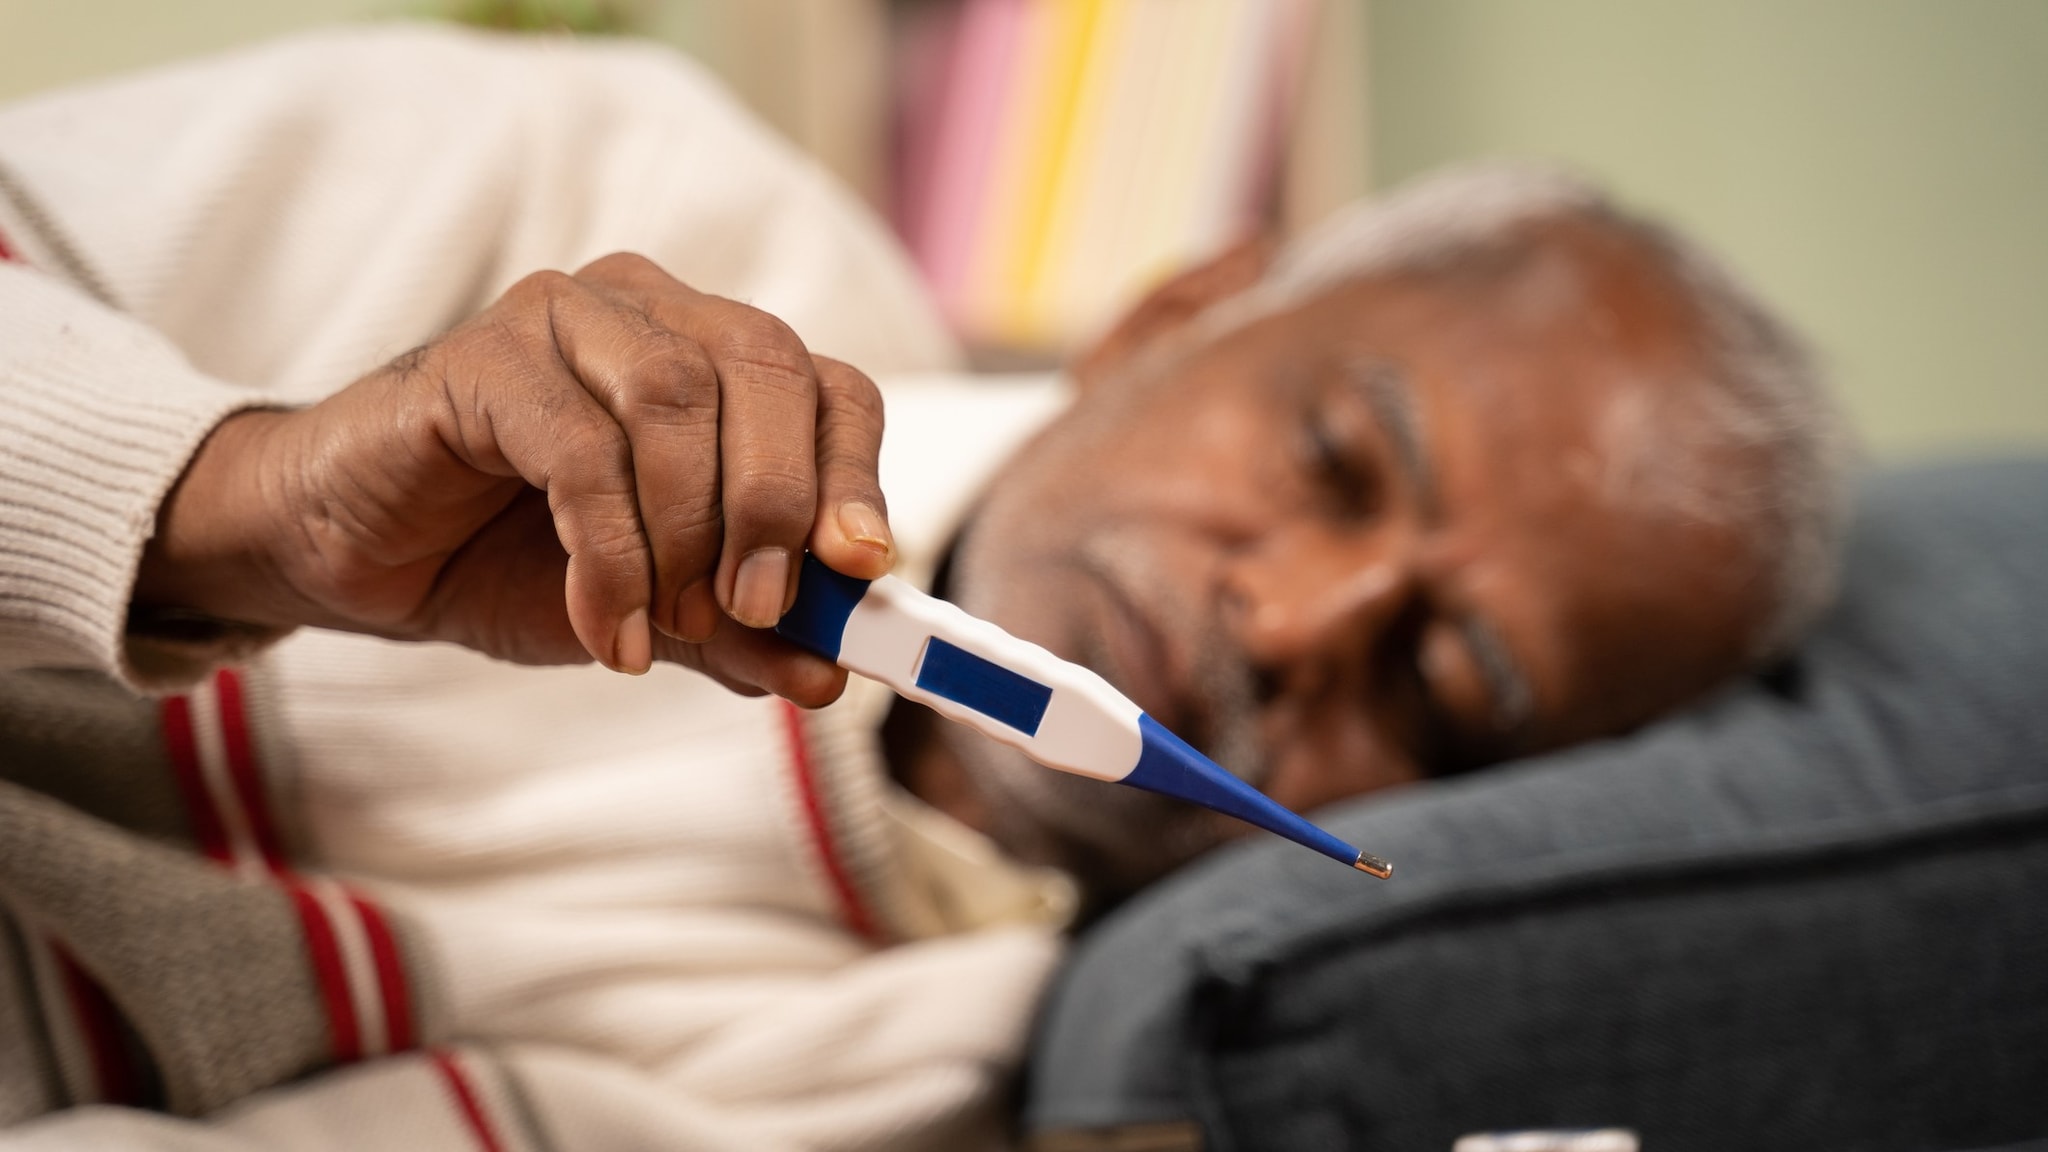 An older adult lying on their side holding a thermometer in their hand.